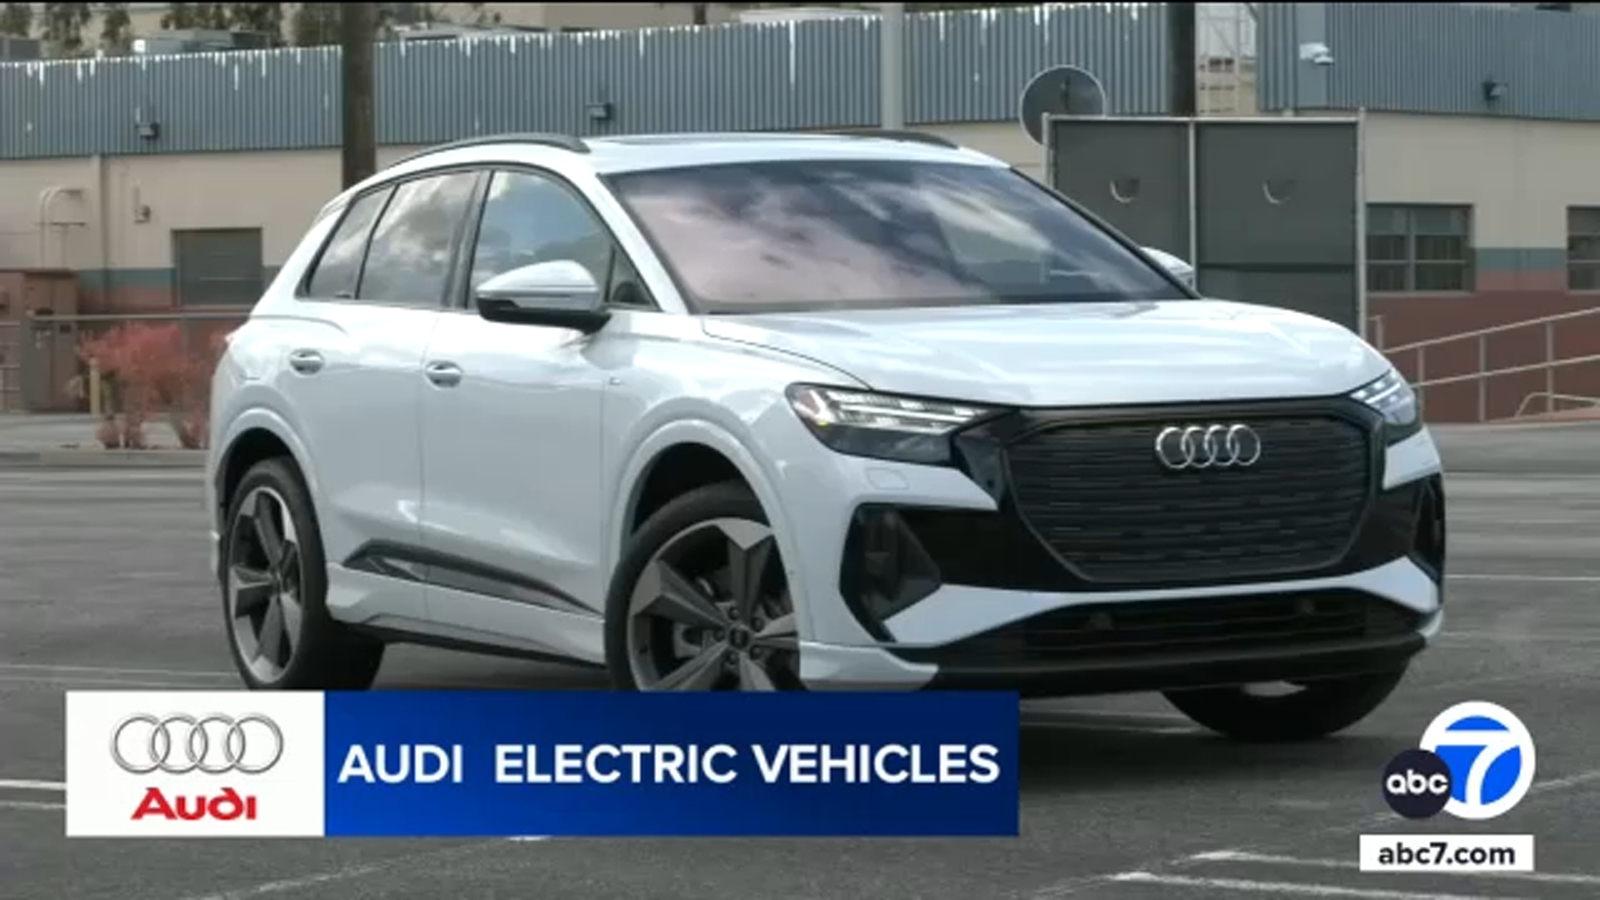 Audi updating EV e-tron line while still focusing on conventional gasoline models as well [Video]